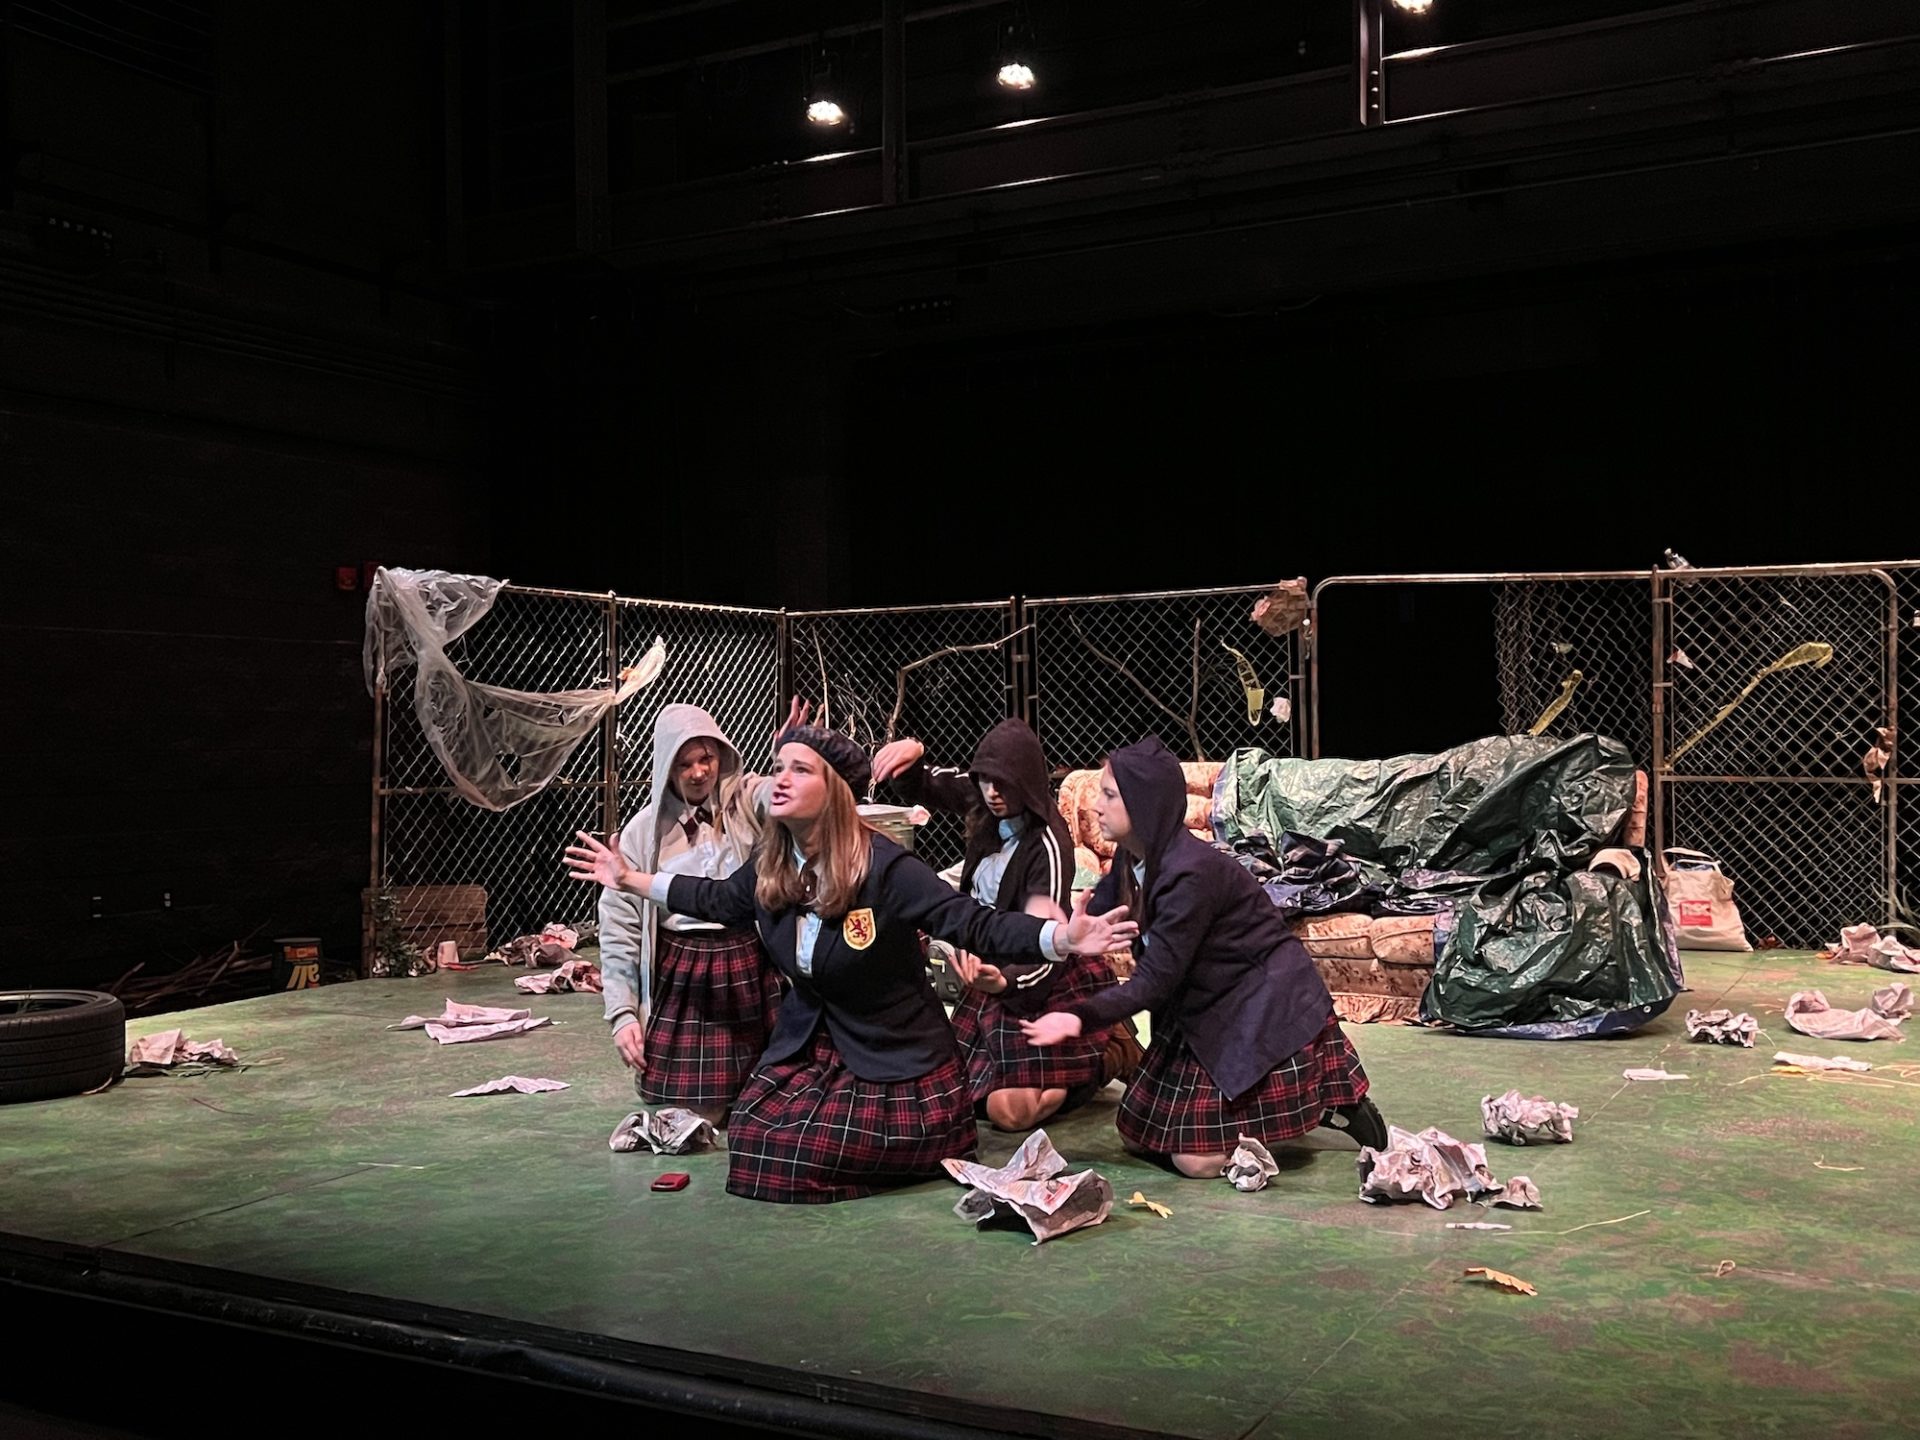 Actresses wearing school uniforms sit on the floor of the stage. Lady Macbeth is in the center with the three witches surrounding her as she gives a passionate monologue. The set looks like an abandoned lot, with a dirty old couch and garbage everywhere.